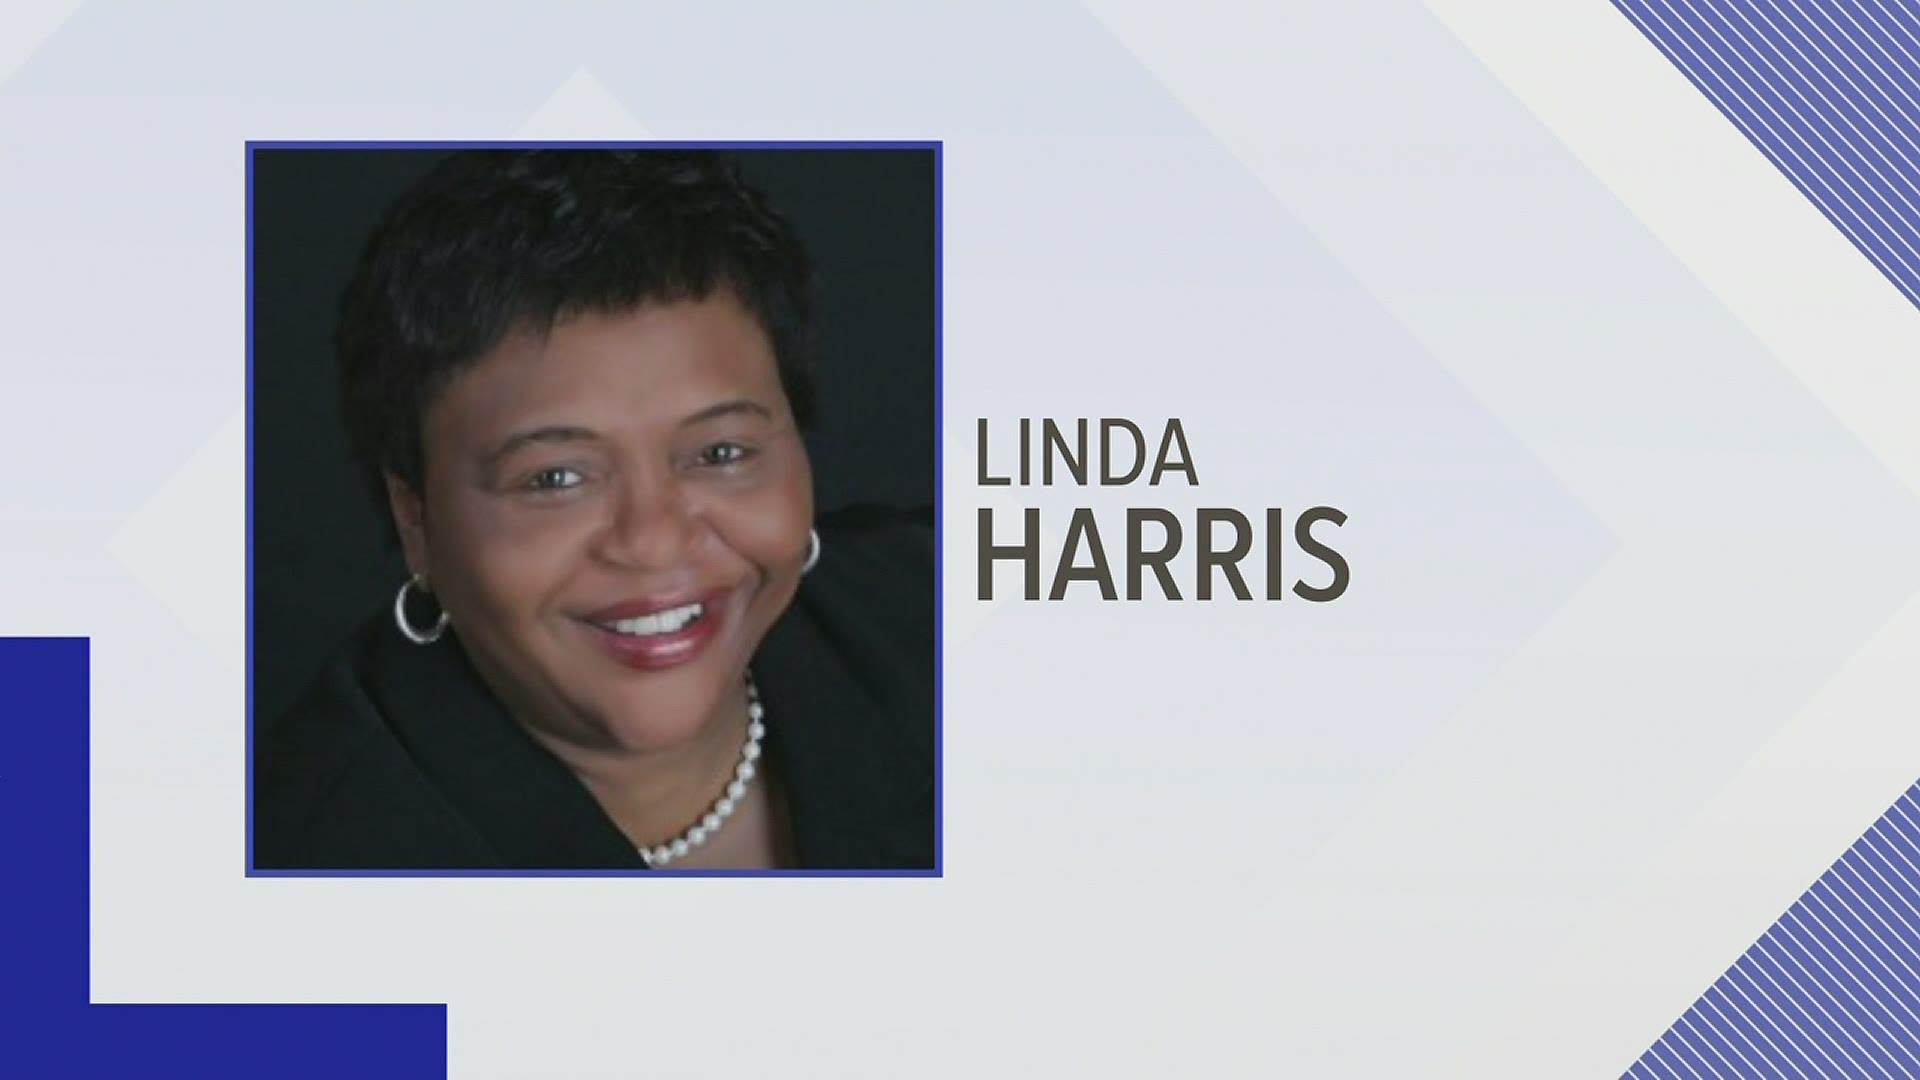 Memphis Attorney Linda Harris announces her plans to take on incumbent Shelby County DA Amy Weirich.